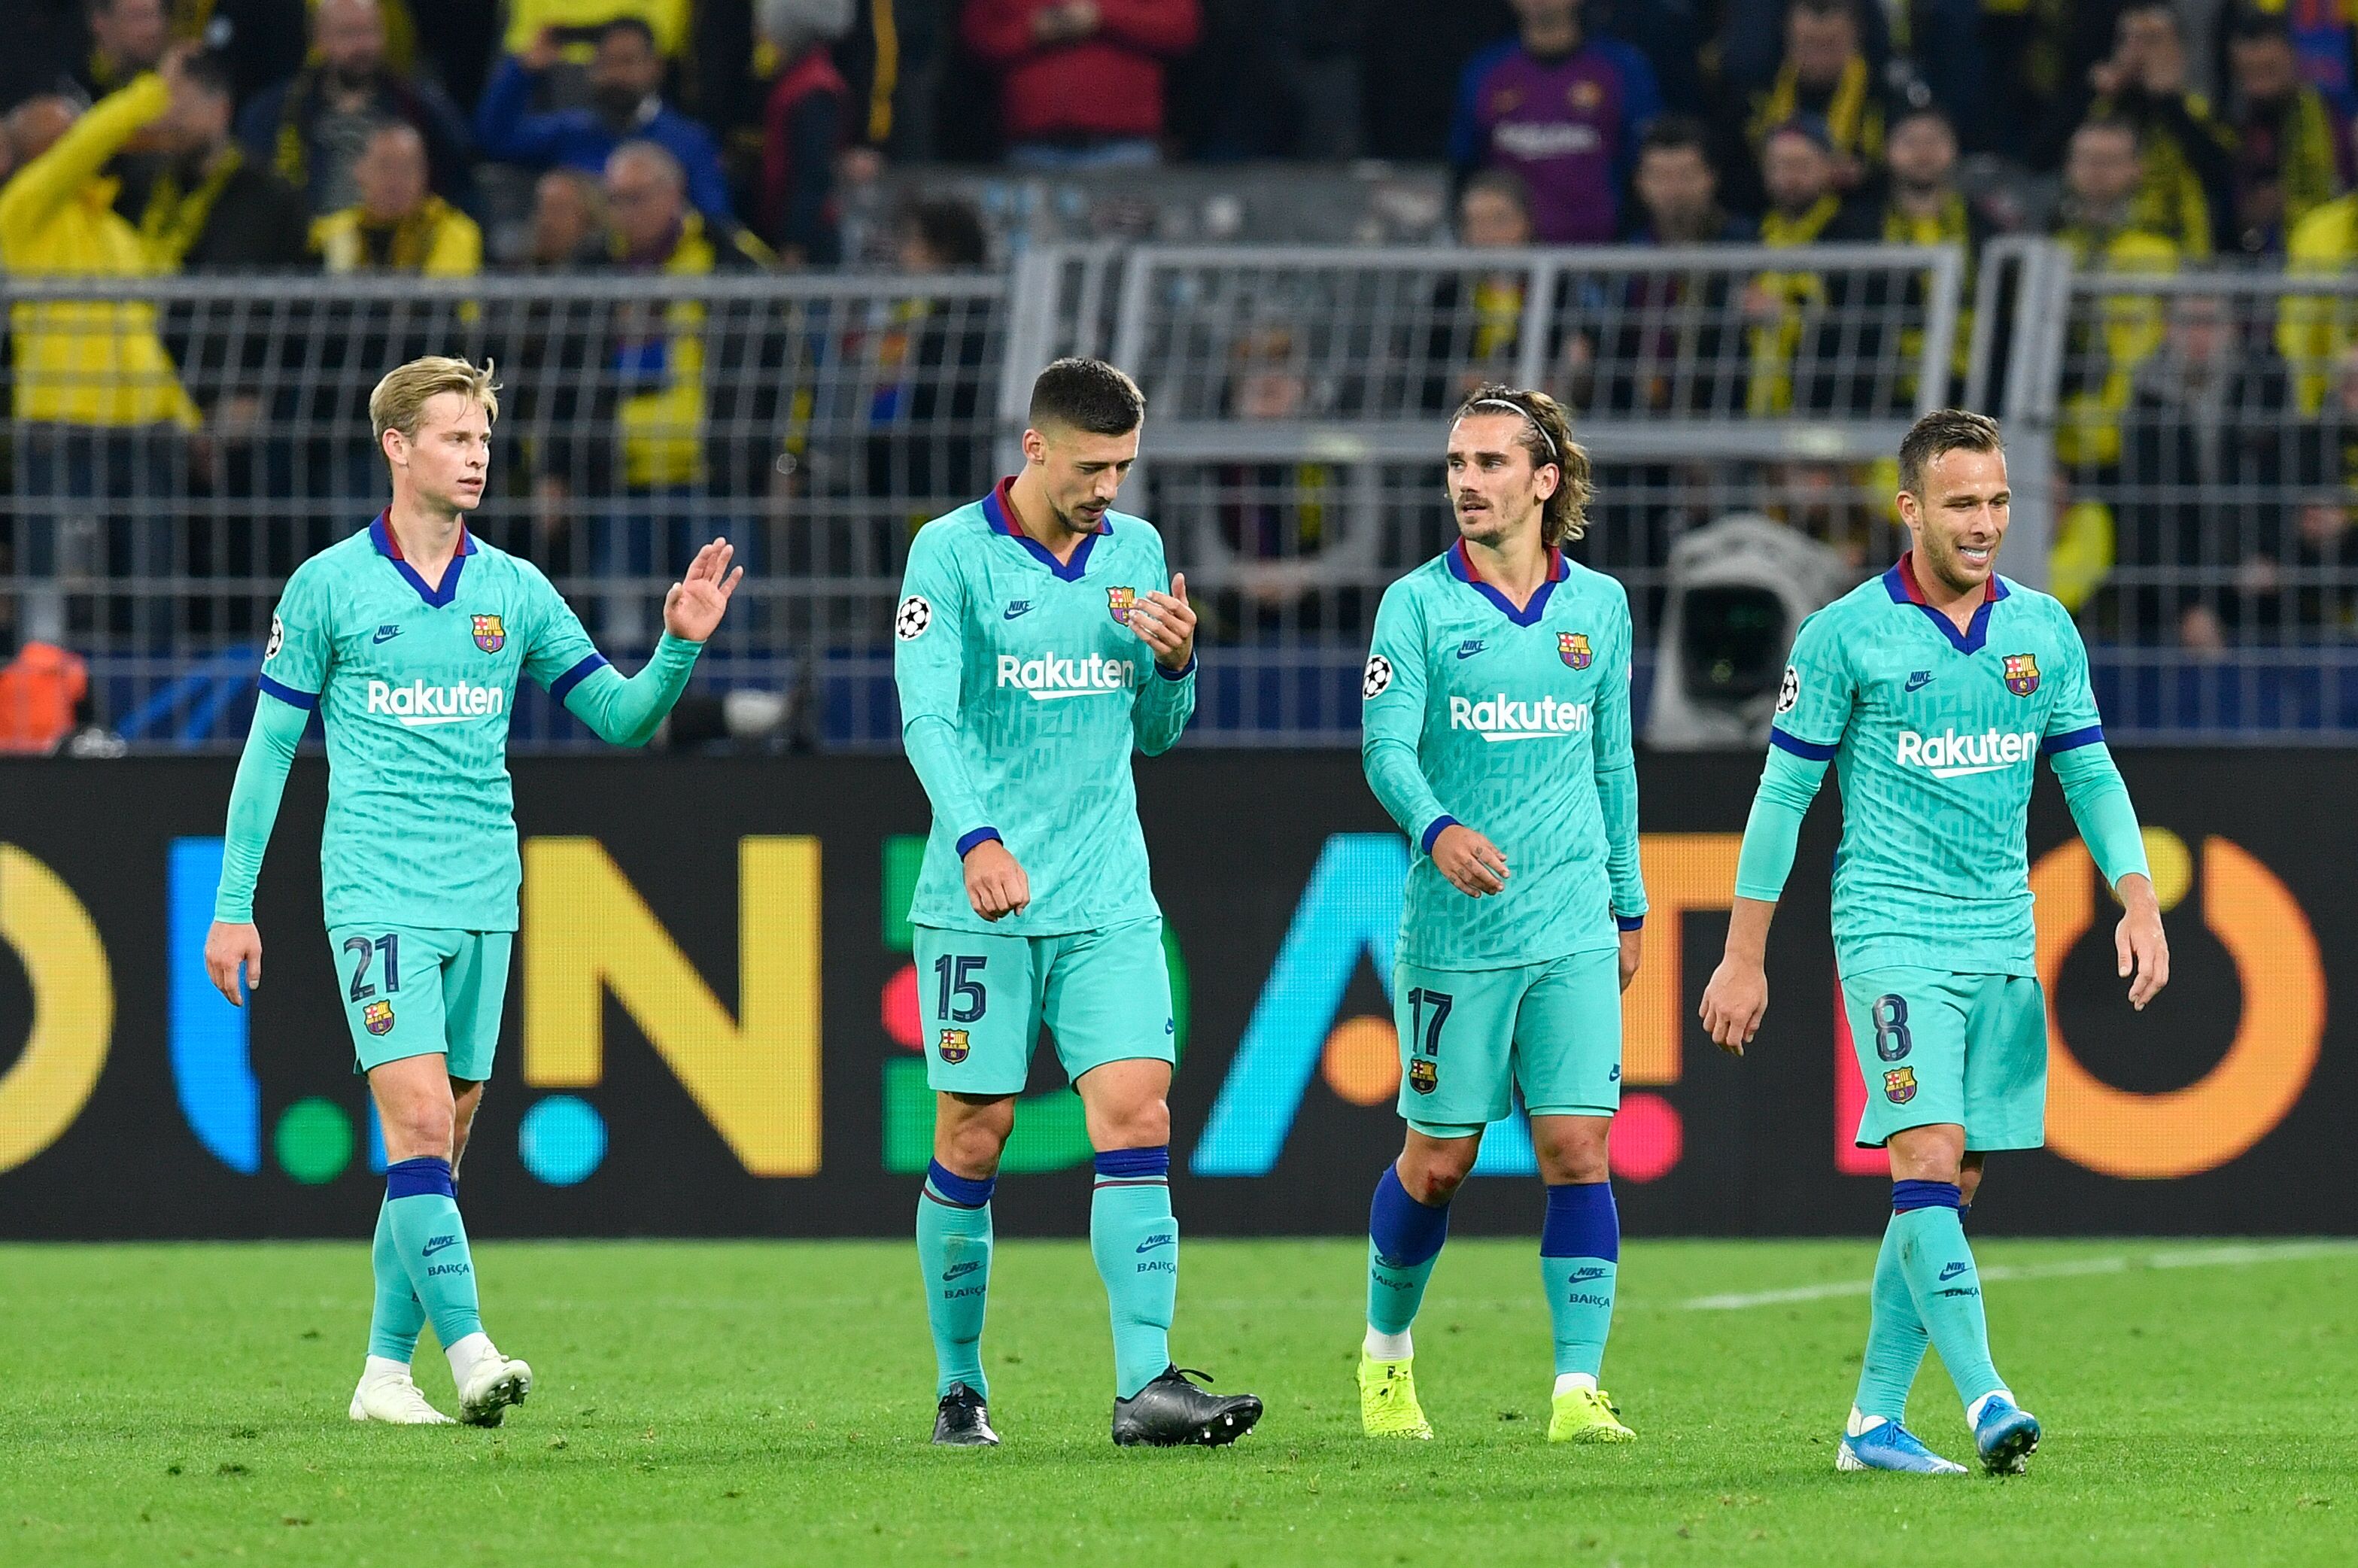 Barcelona's Dutch midfielder Frenkie De Jong, Barcelona's French defender Clement Lenglet, Barcelona's French forward Antoine Griezmann and Barcelona's Brazilian midfielder Arthur walk off the pitch after the UEFA Champions League Group F football match Borussia Dortmund v FC Barcelona in Dortmund, western Germany, on September 17, 2019. (Photo by John MACDOUGALL / AFP)        (Photo credit should read JOHN MACDOUGALL/AFP/Getty Images)